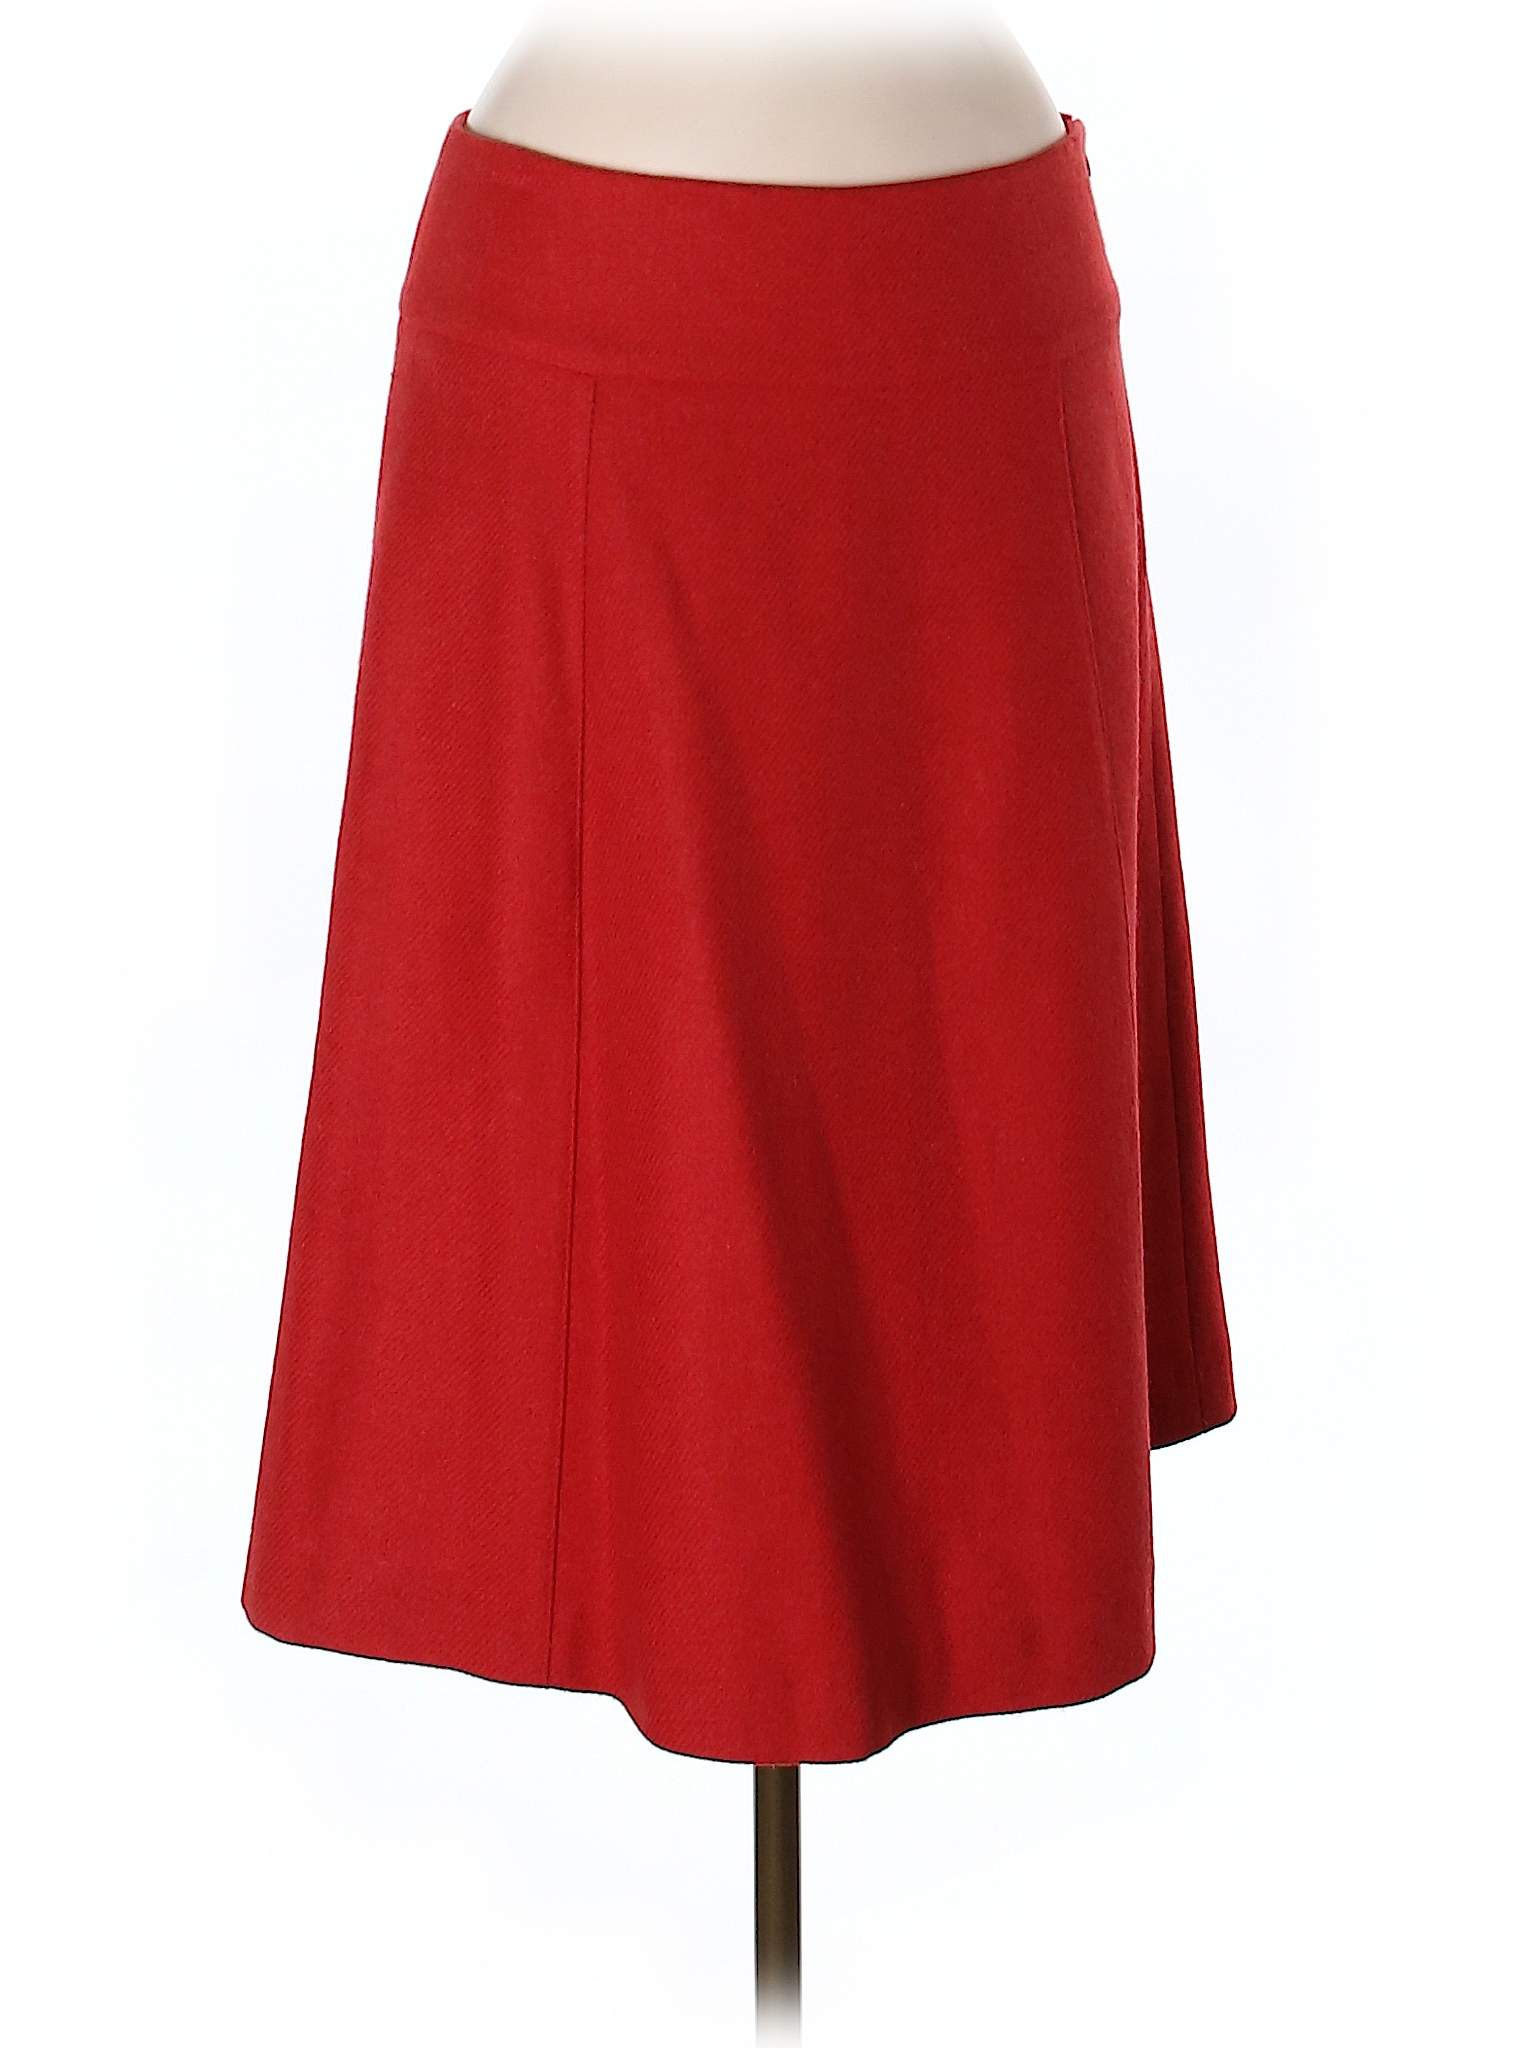 J.Crew 100% Lambswool Solid Red Wool Skirt Size 6 - 76% off | thredUP